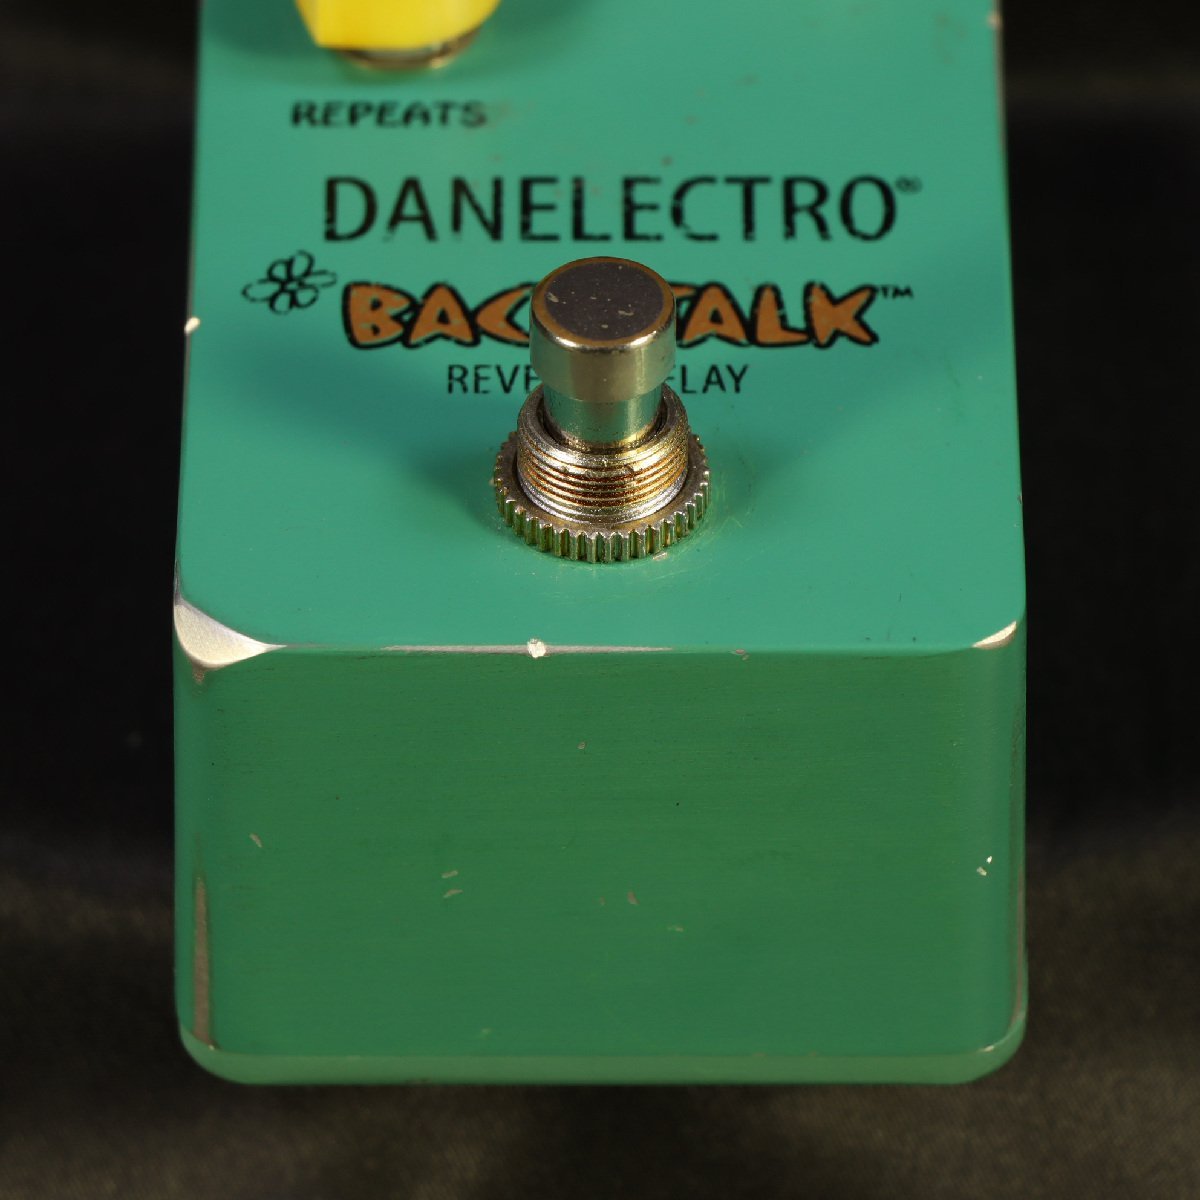 DANELECTRO BACK TALK Limited Editionギター